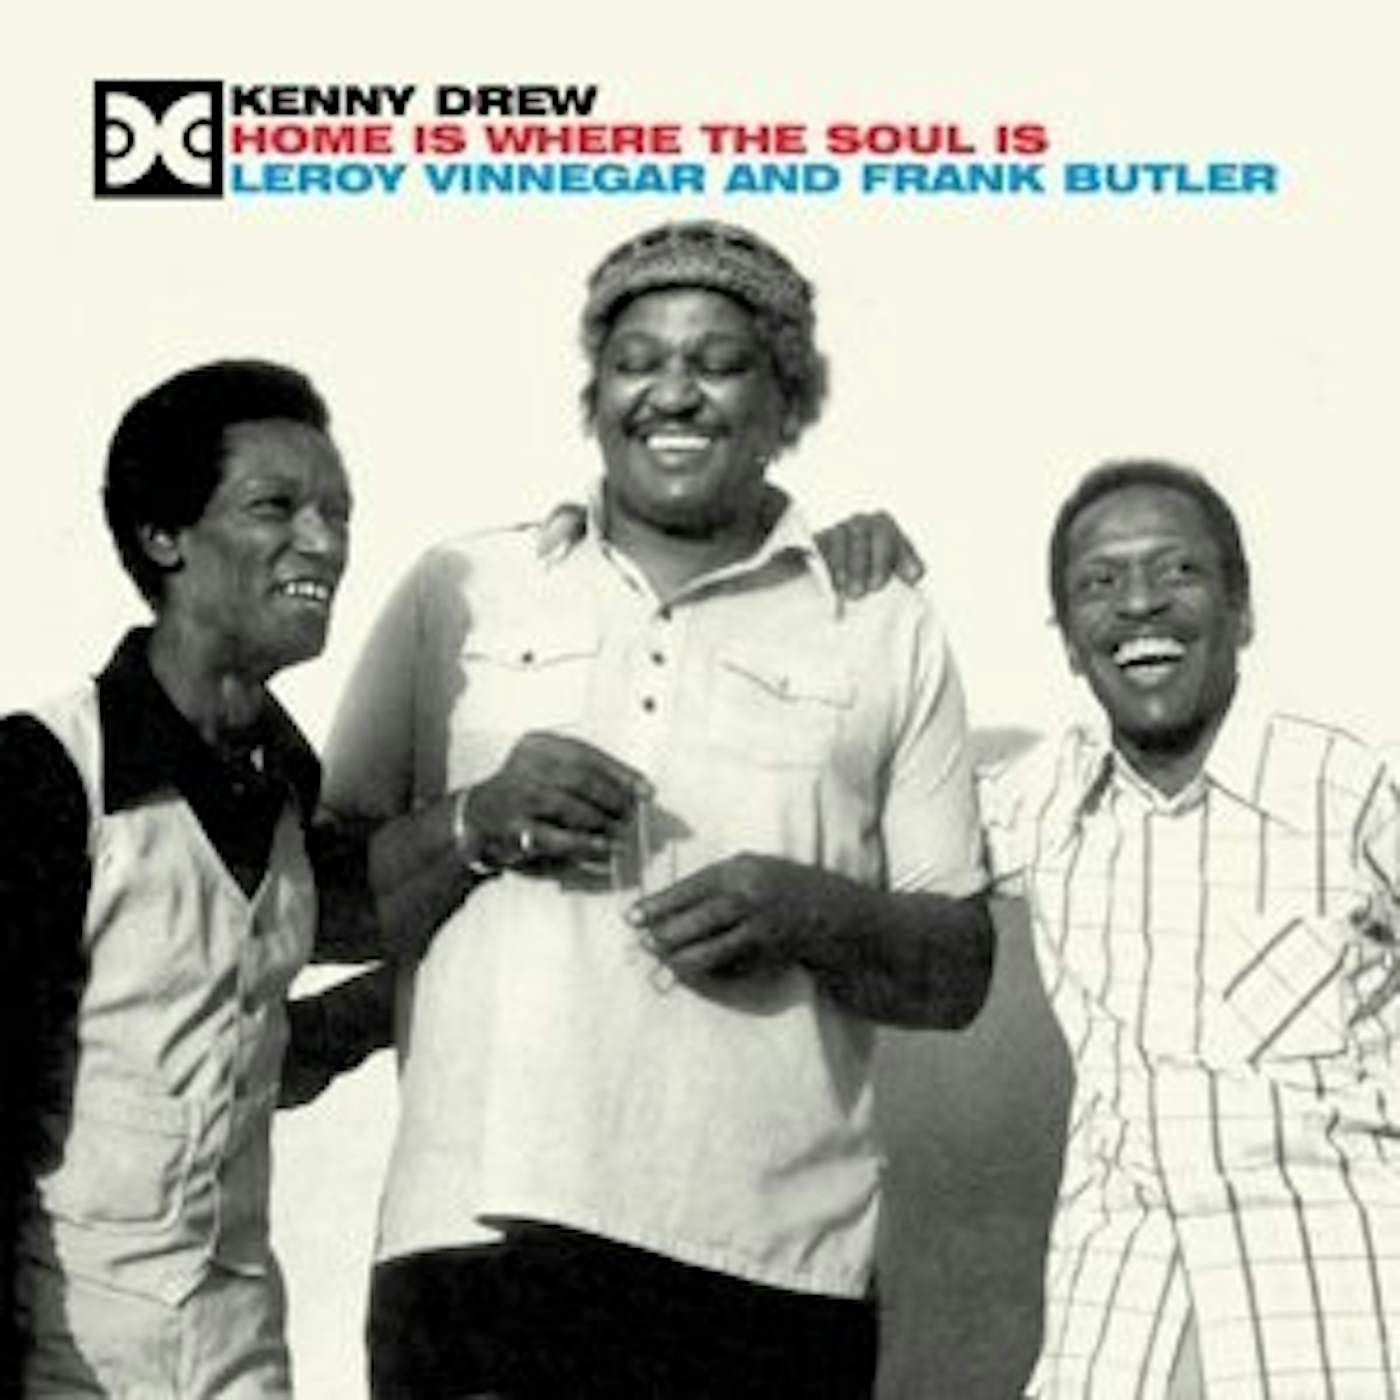 Kenny Drew HOME IS WHERE THE SOUL IS CD